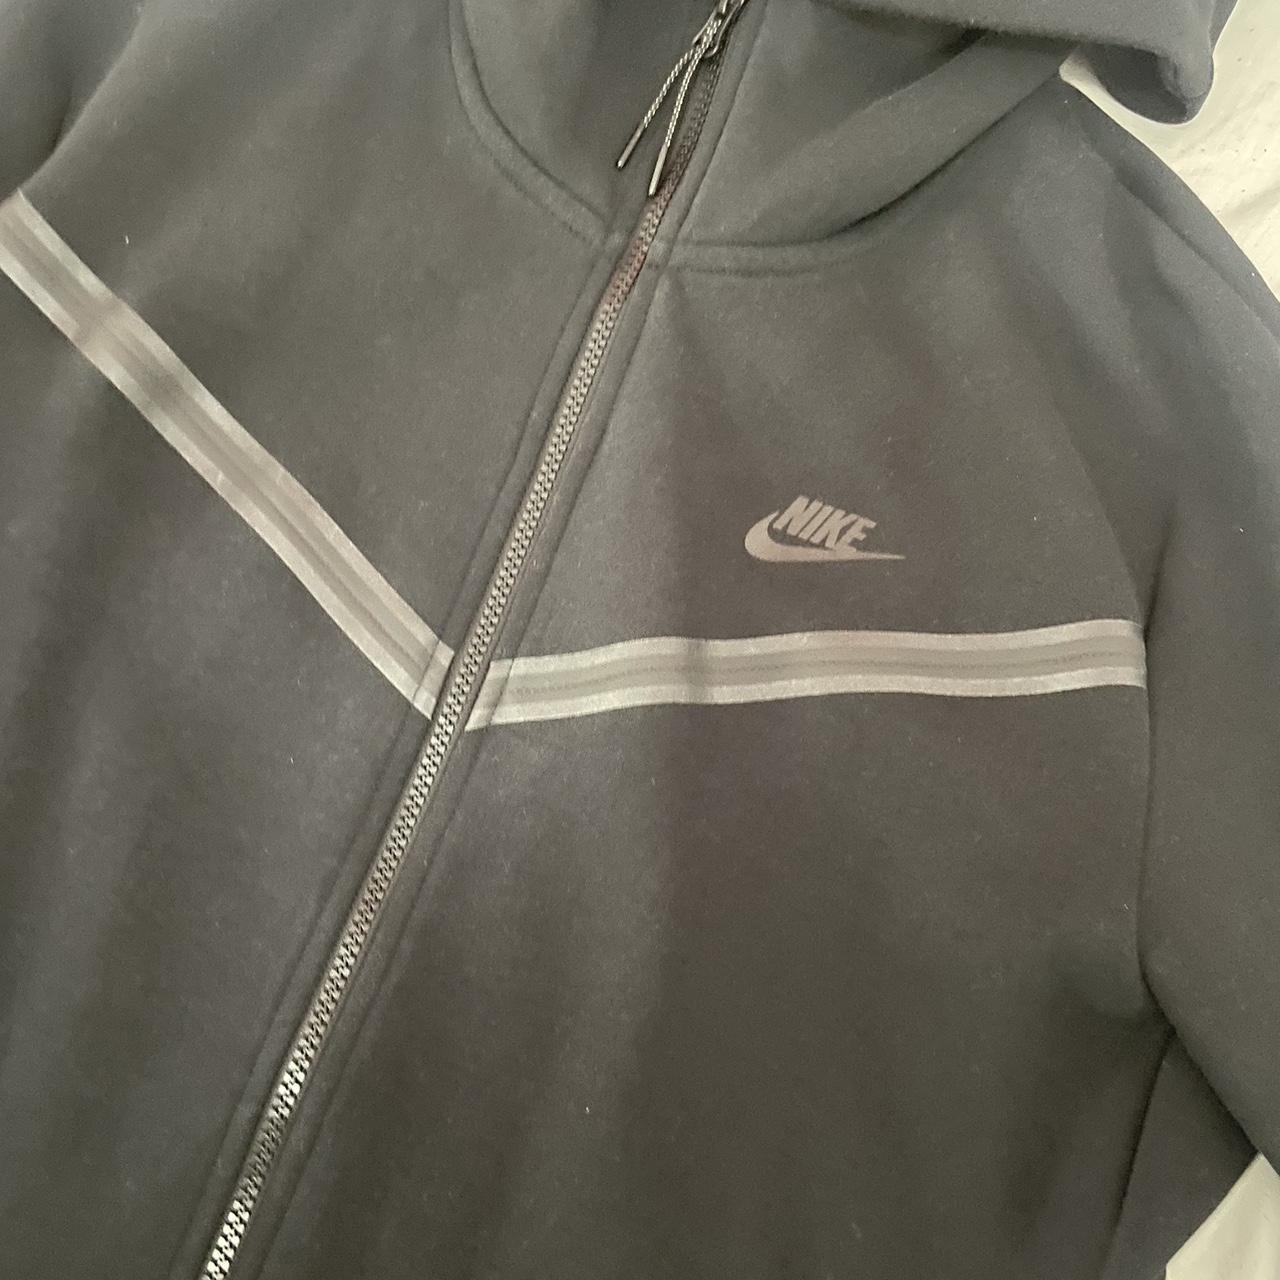 nike tech worn 2 times in great condition - Depop